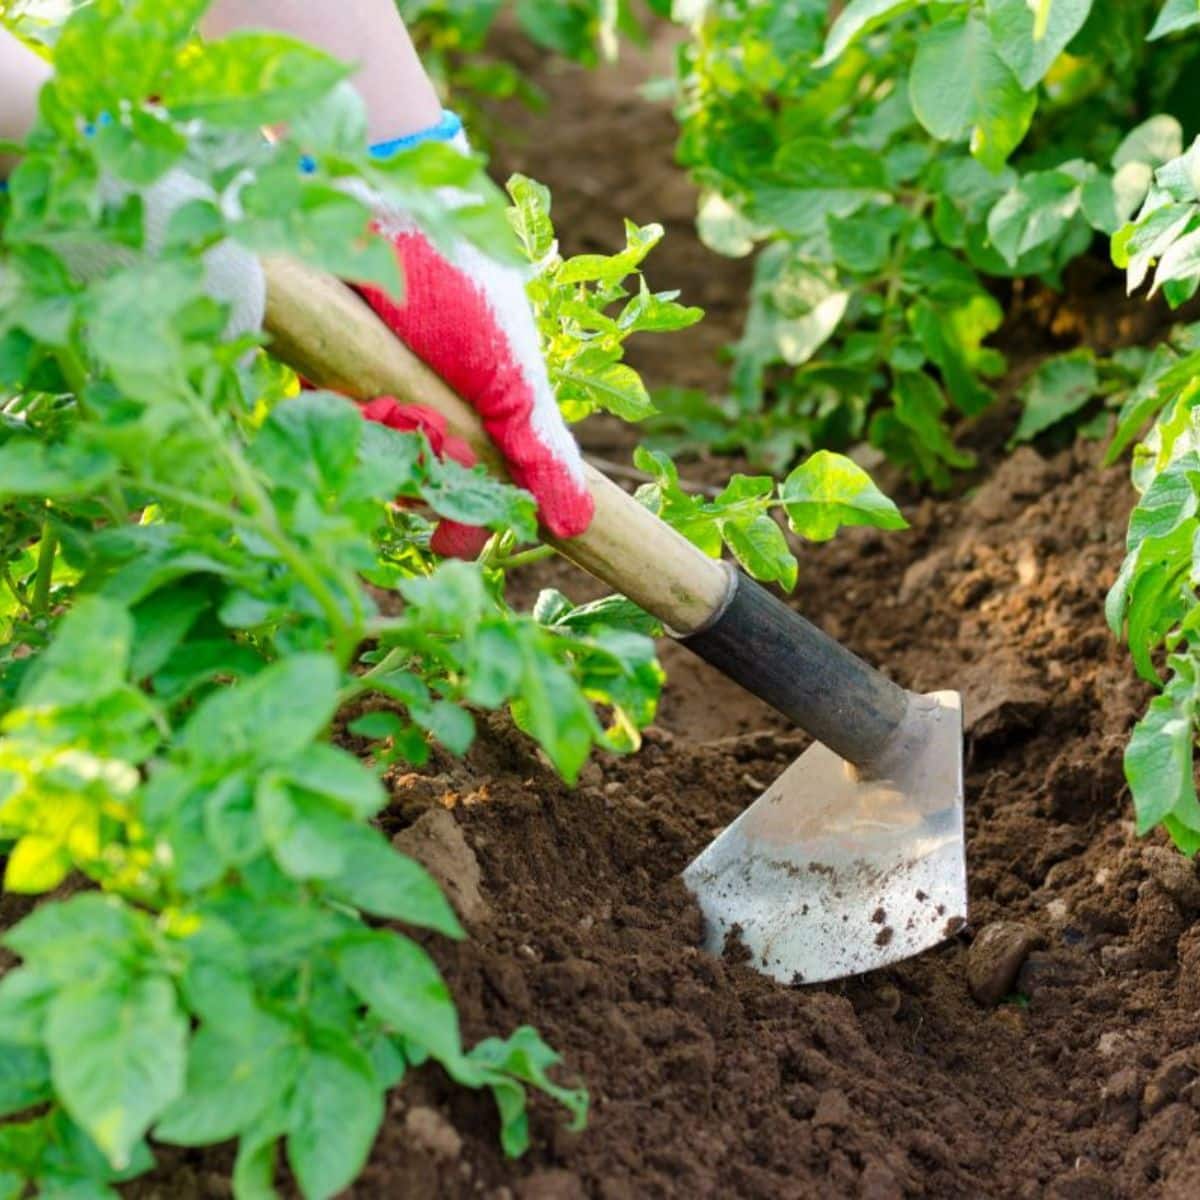 A gardener with gloves pulling soil to potato plants with a hoe.